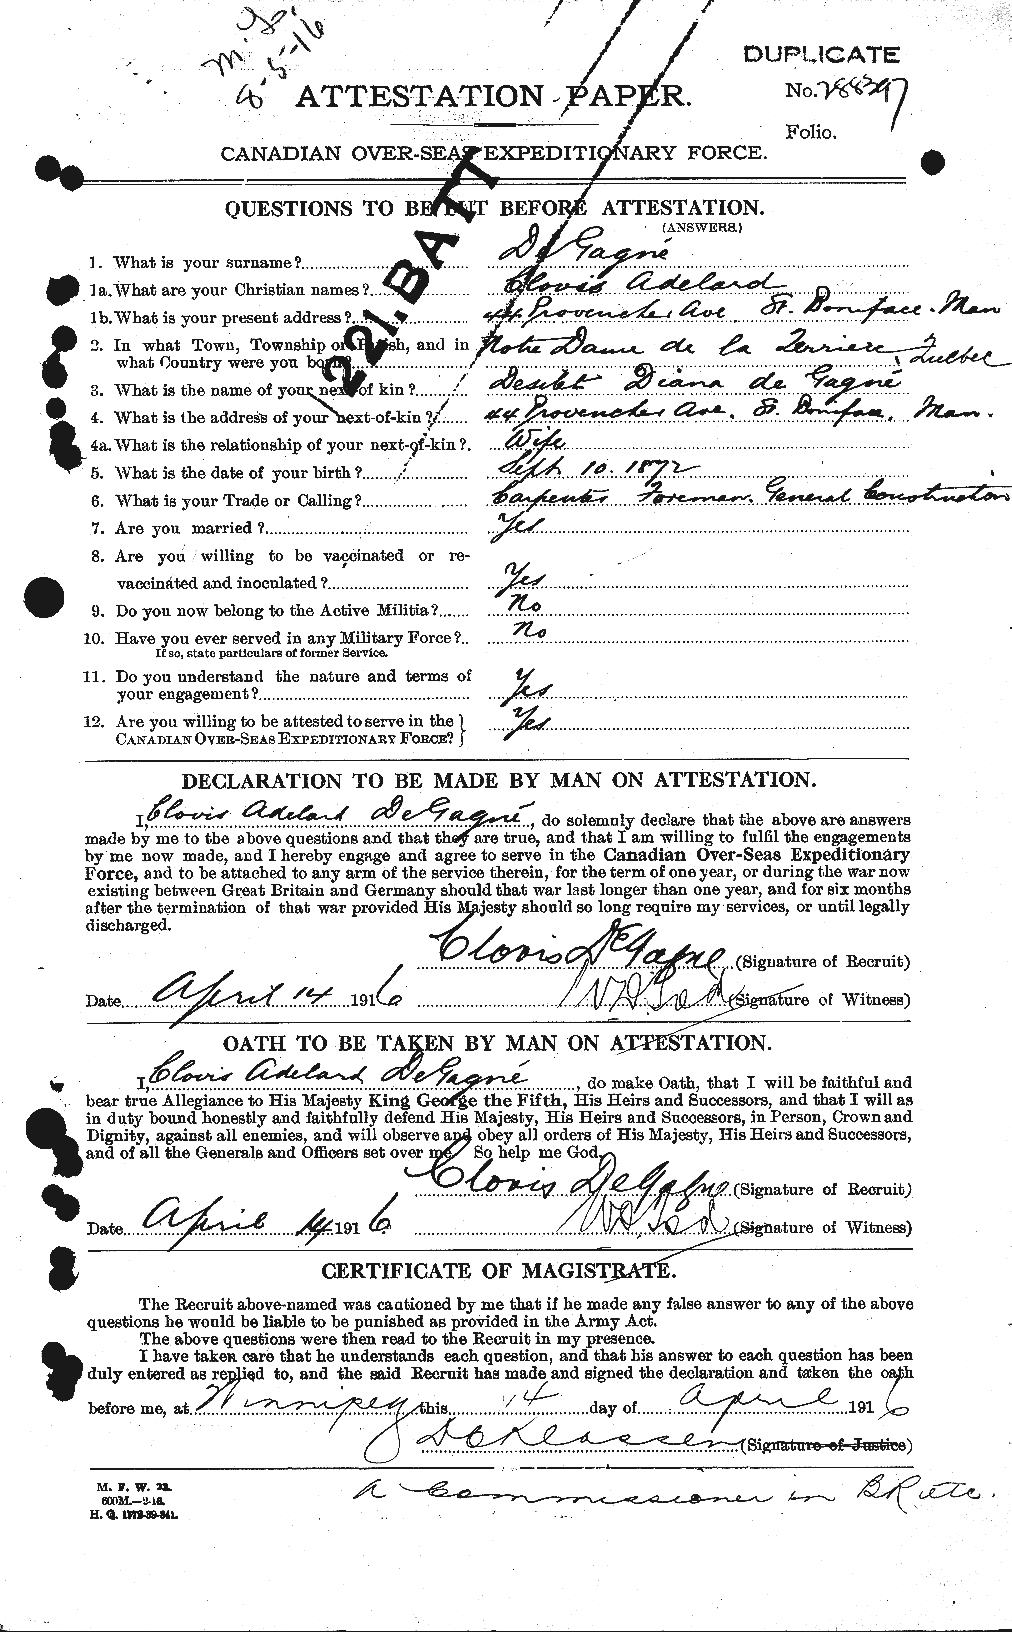 Personnel Records of the First World War - CEF 285923a